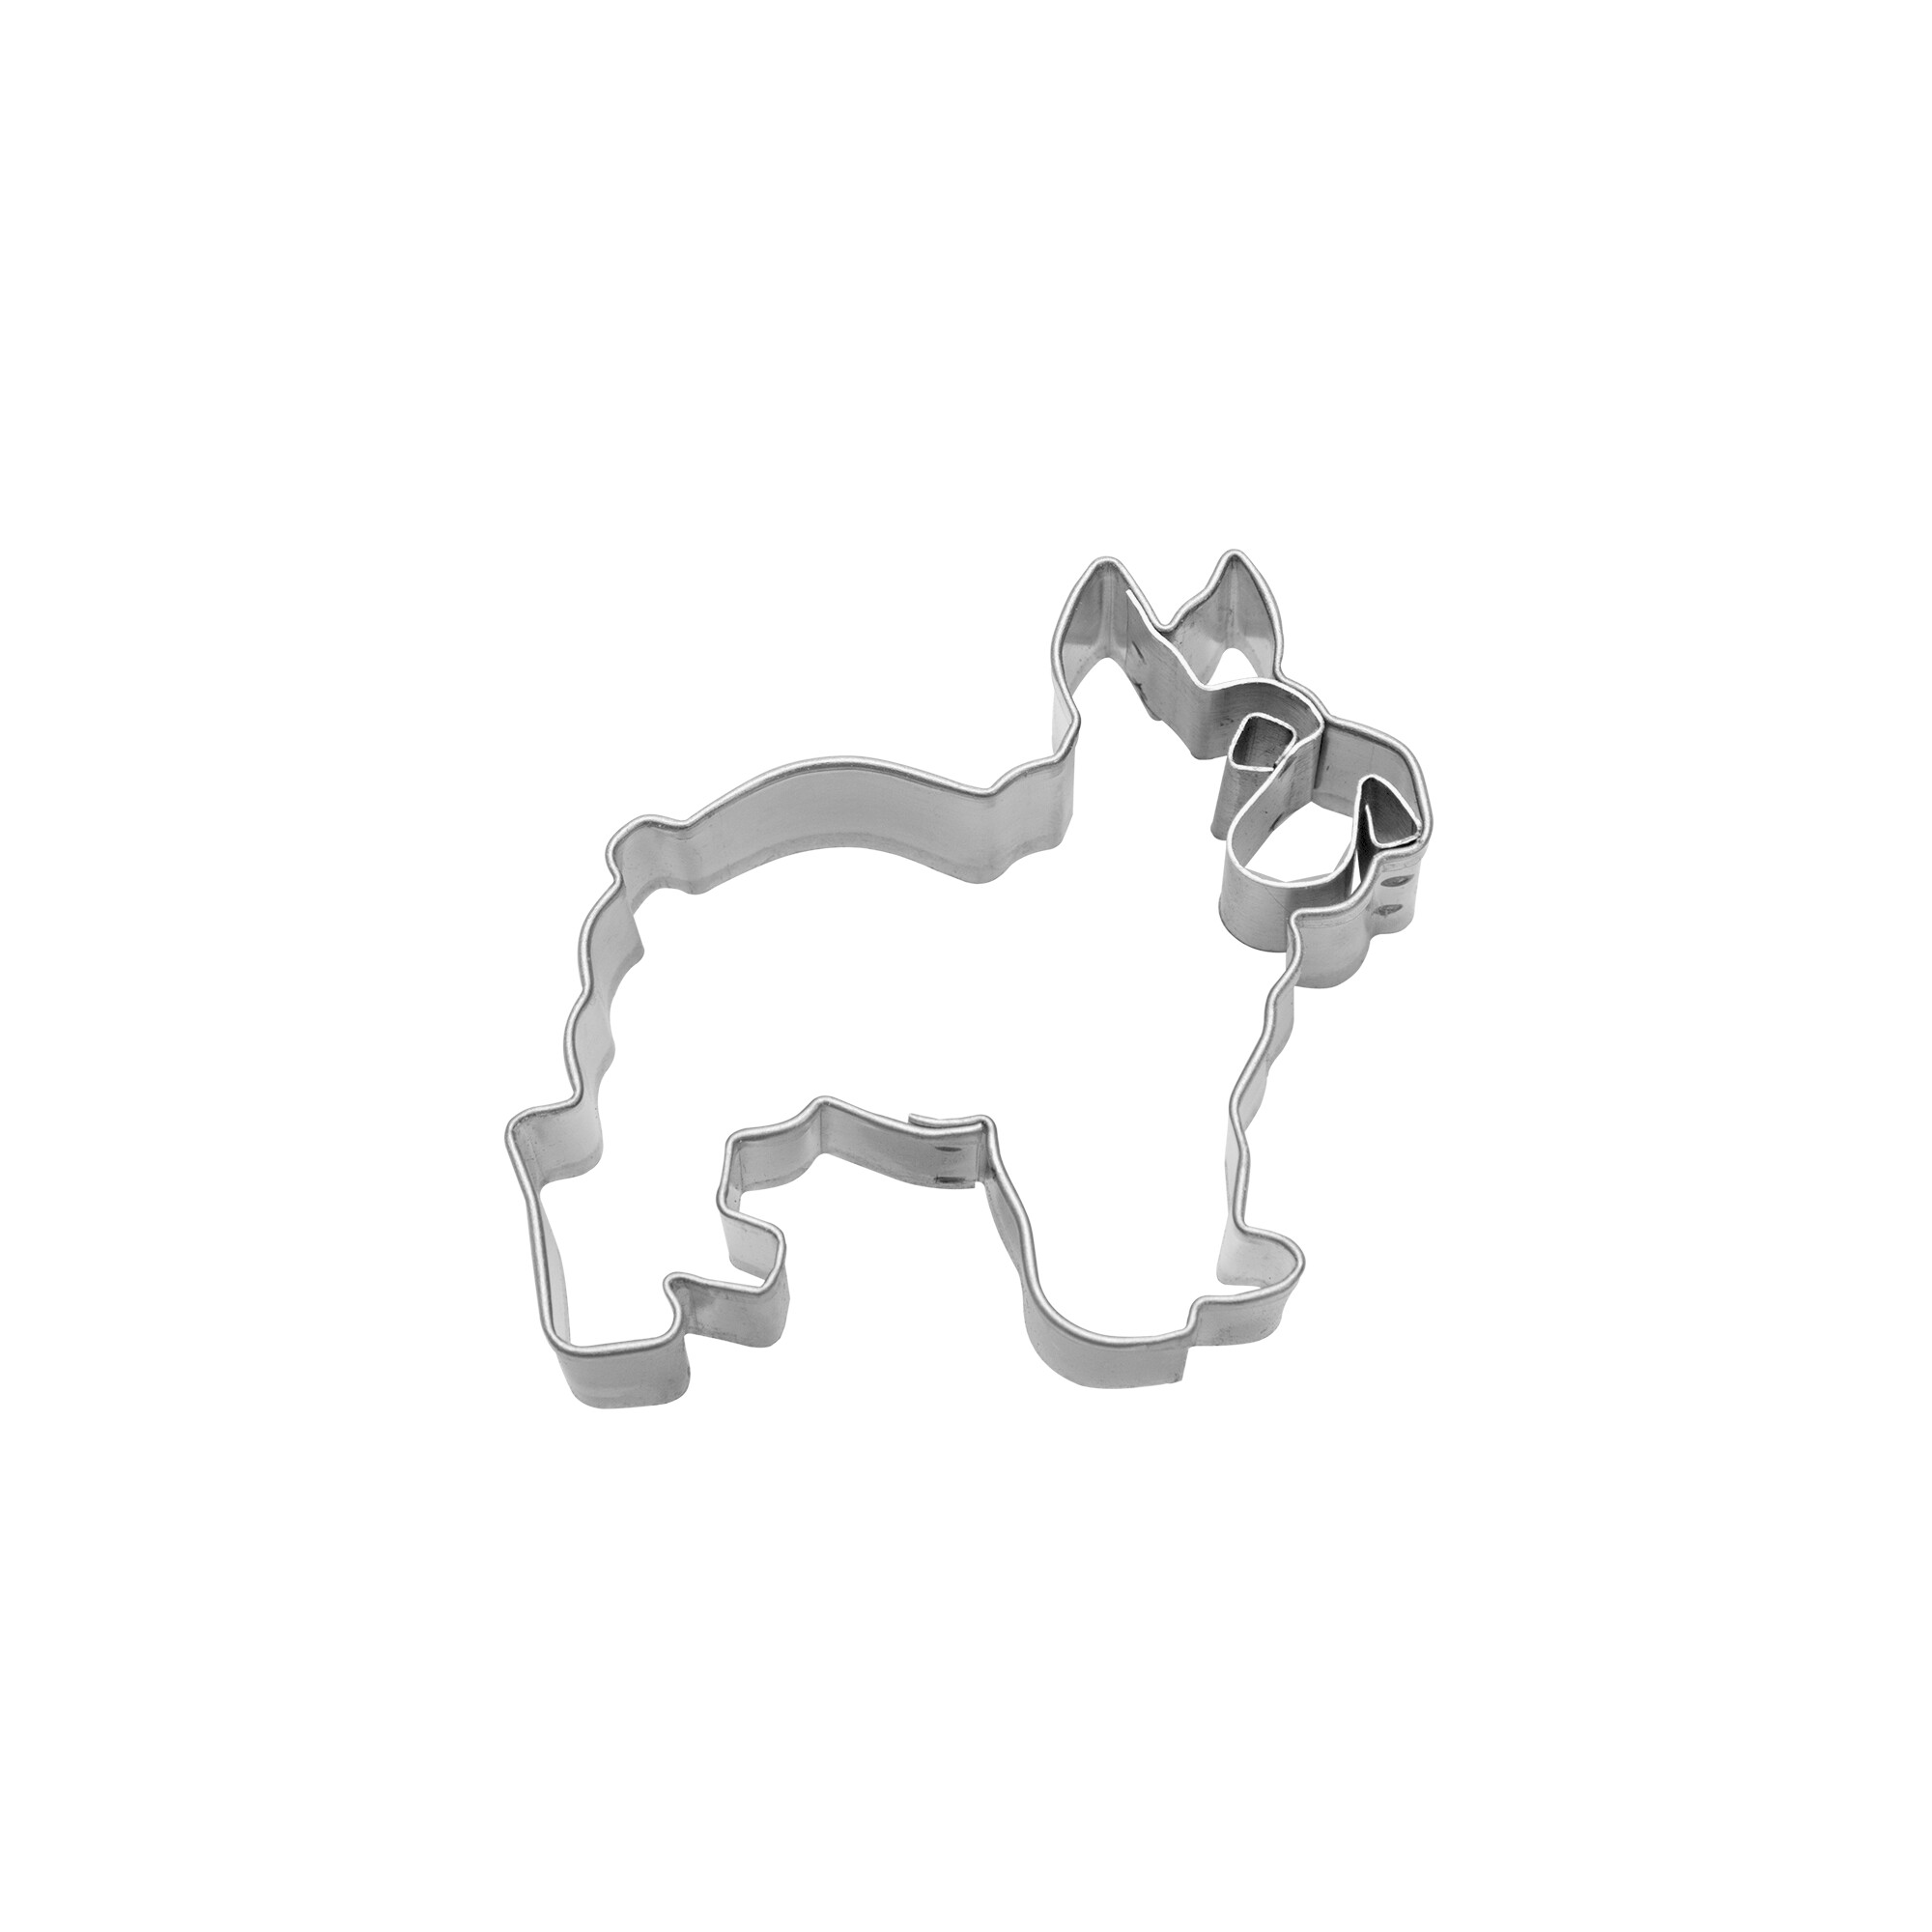 Cookie cutter with stamp – Bulldog